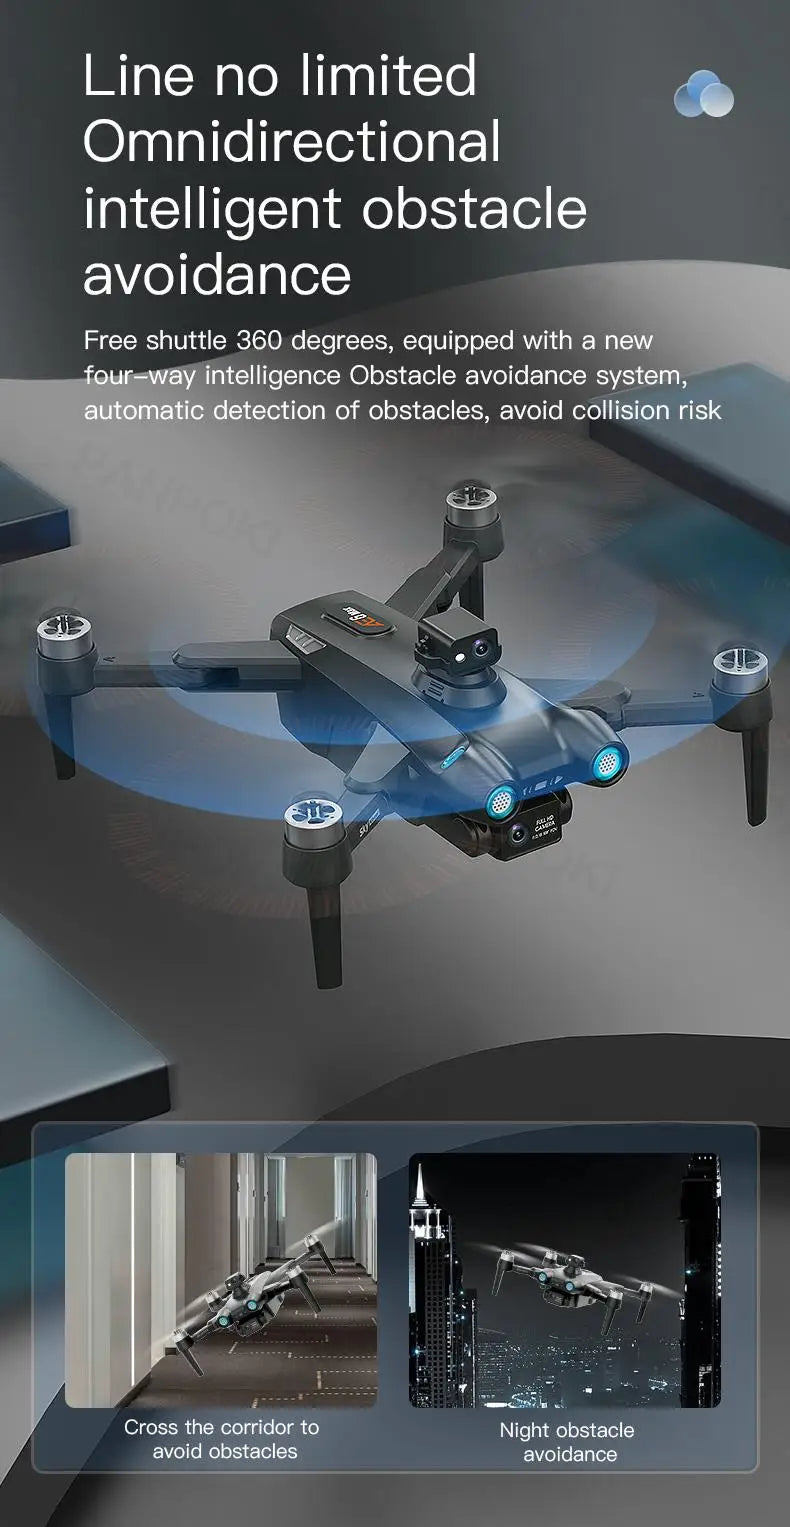 AE6 Max Drone, a new four-way obstacle avoidance system is installed on the shuttle . the system